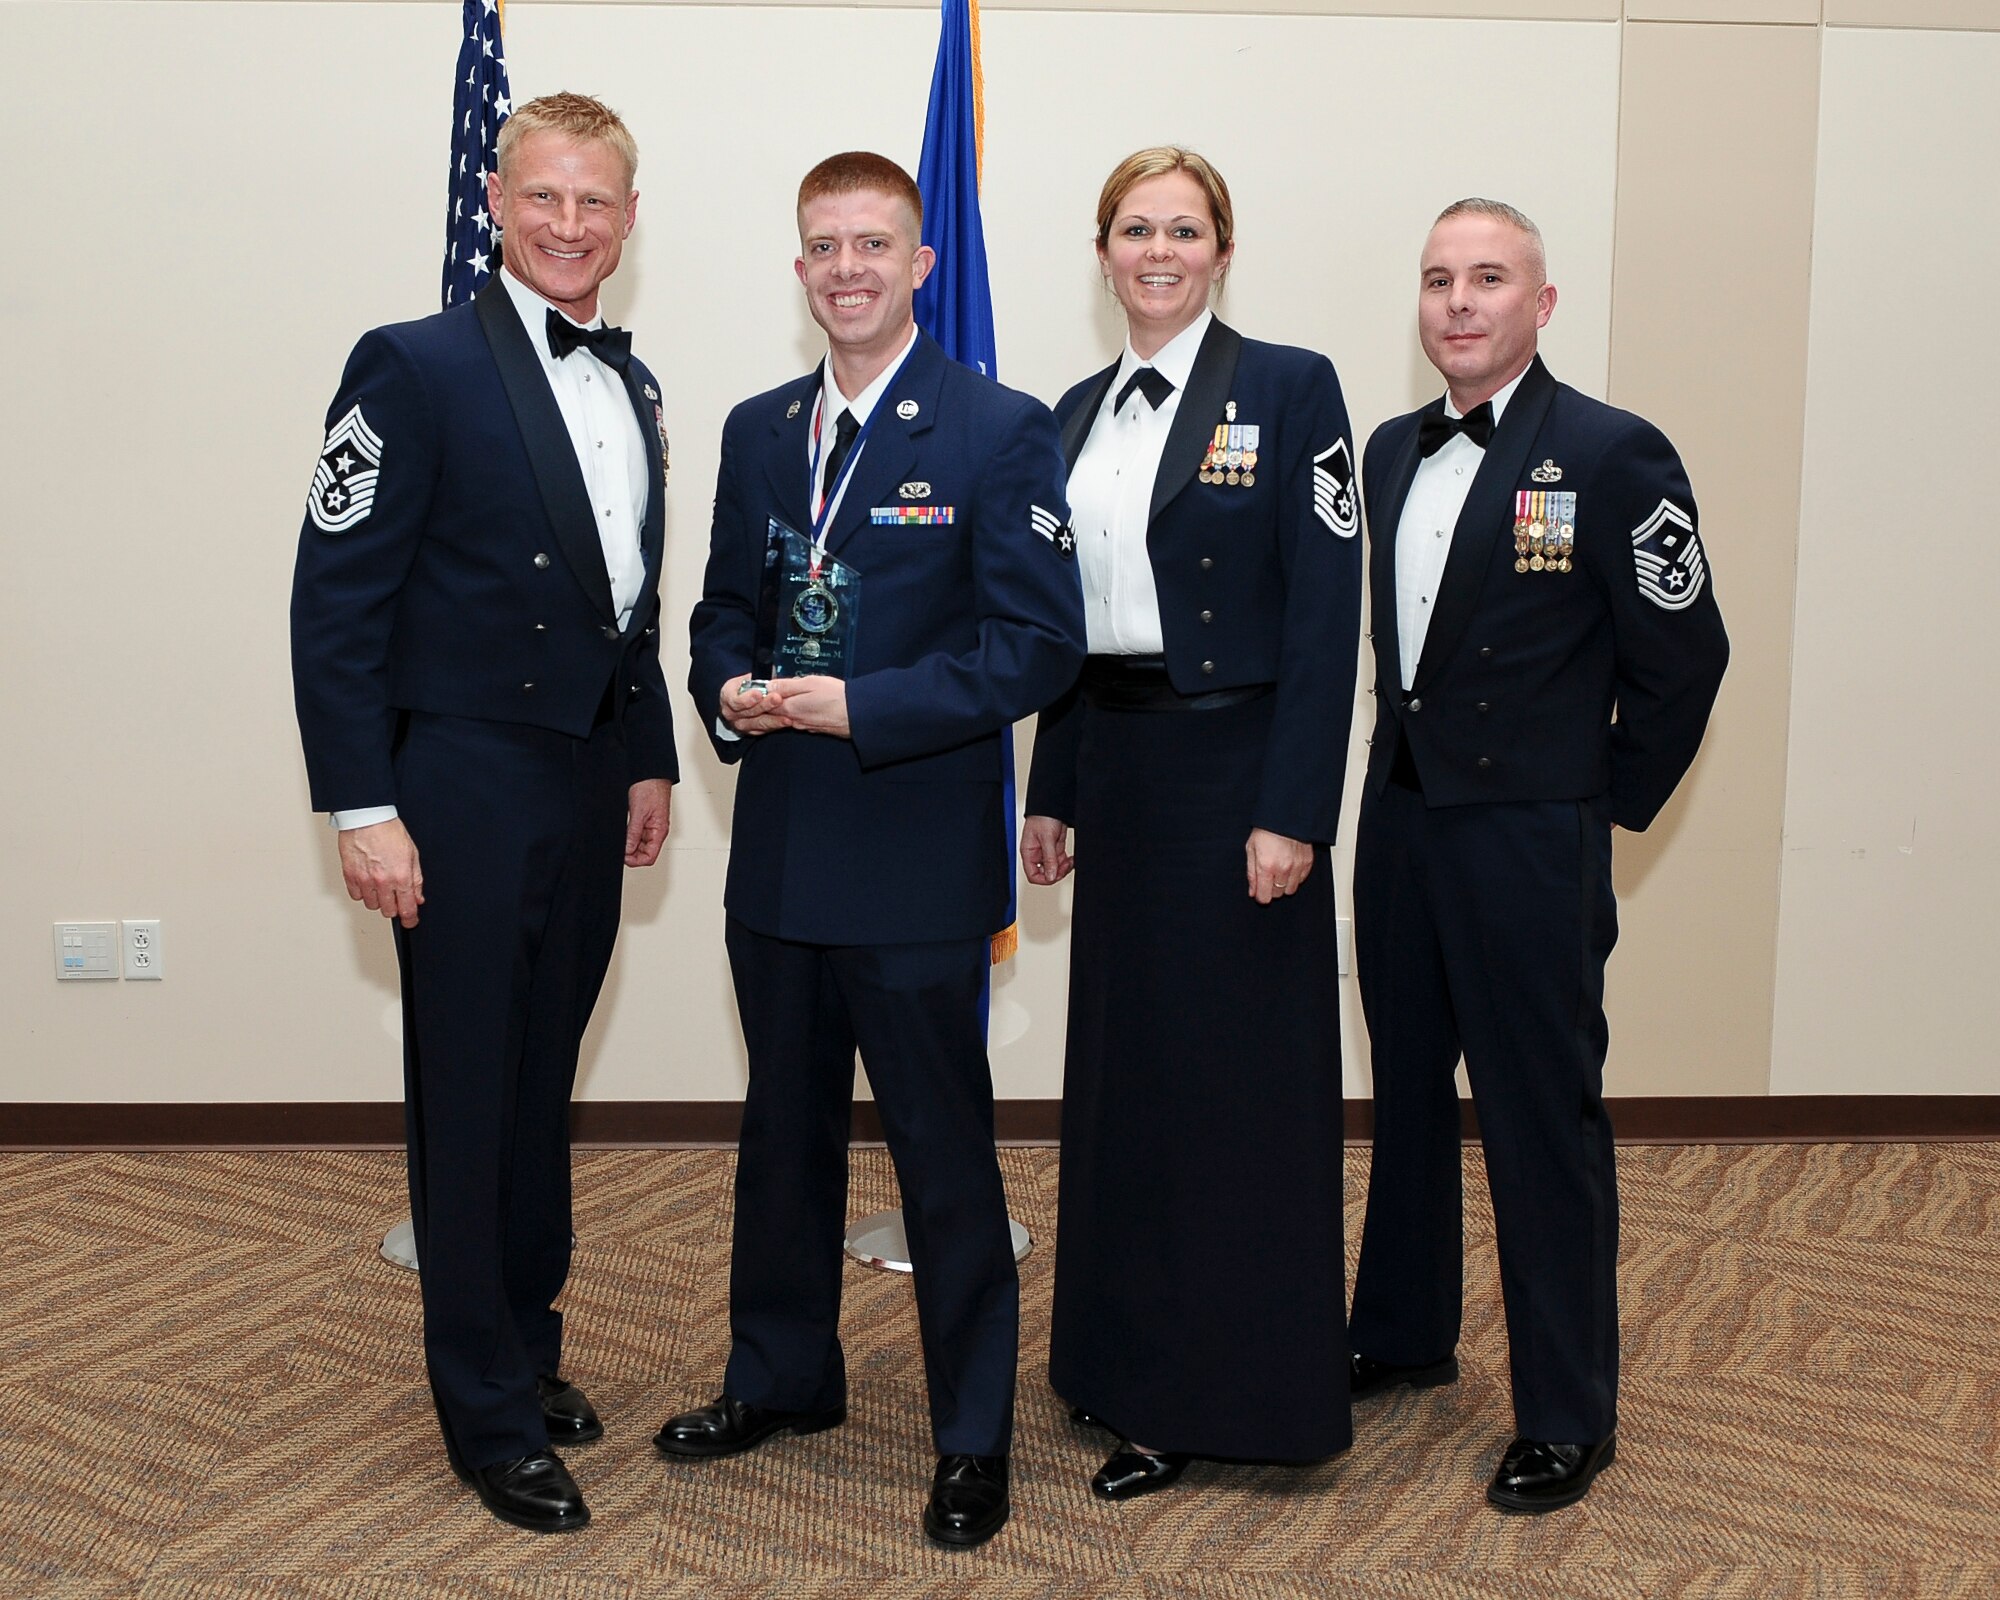 Senior Airman Jonathan Compton, 460th Civil Engineer Squadron, center left, receives the Leadership Award during the Buckley Airman Leadership School Class 14-B graduation Feb. 13, 2014, at the Leadership Development Center on Buckley Air Force Base, Colo. This award is presented to the graduate who displays the best overall characteristics of an effective leader. (U.S. Air Force photo by Senior Airman Phillip Houk/Released)